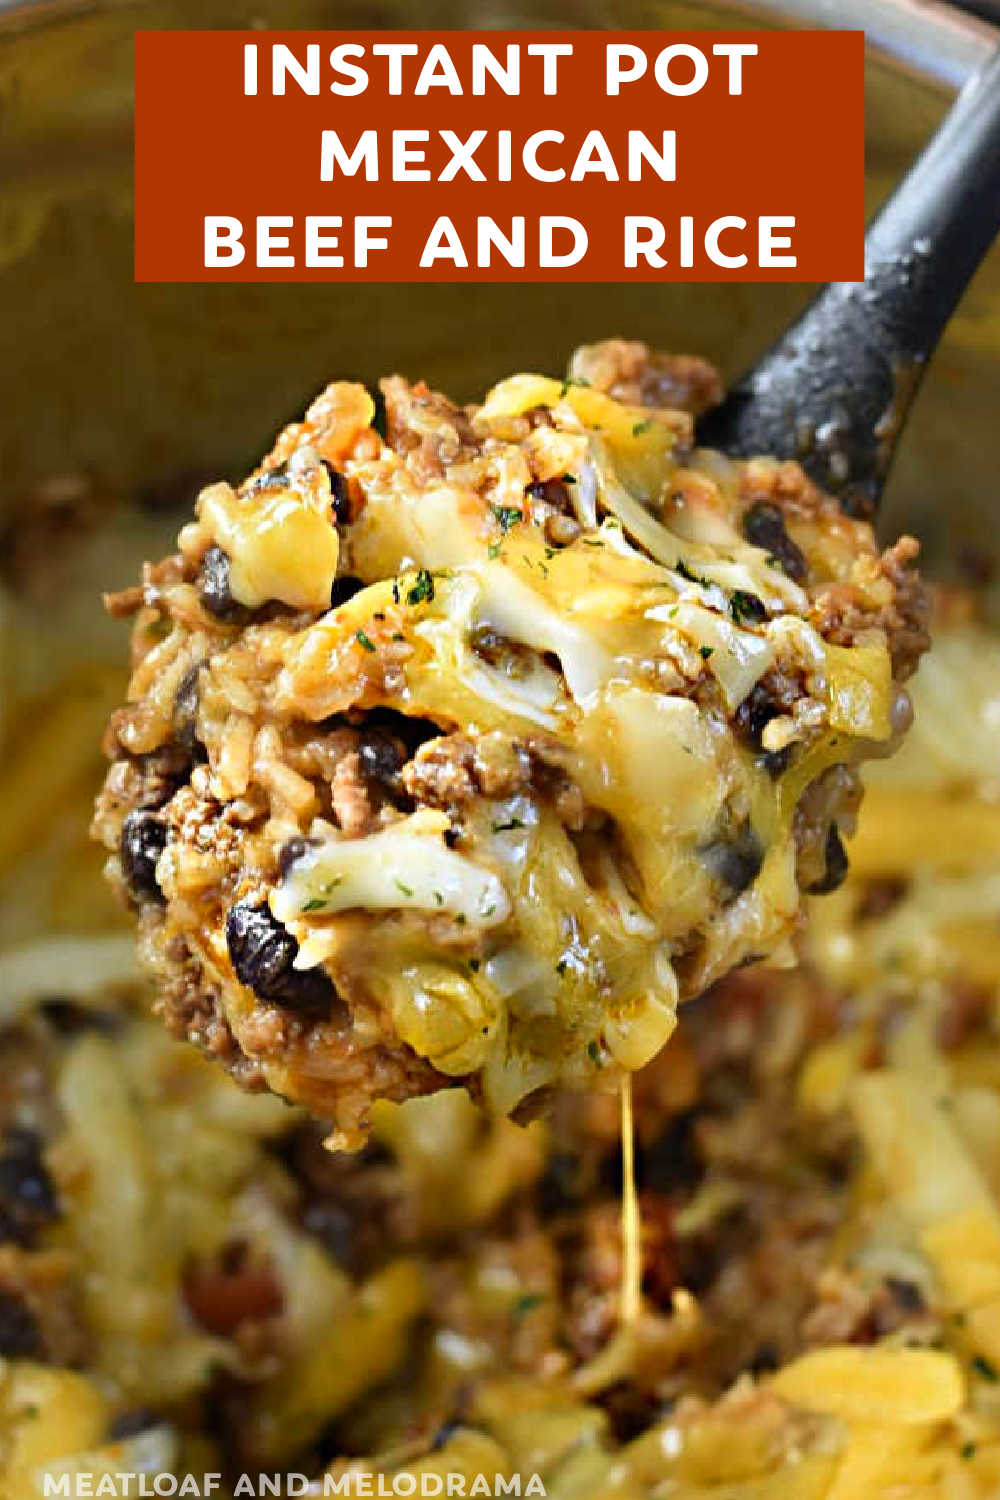 Instant Pot Mexican Beef and Rice is an easy recipe with ground beef, rice, black beans, salsa and cheese. An easy dinner for busy weeknights made in the pressure cooker!  via @meamel